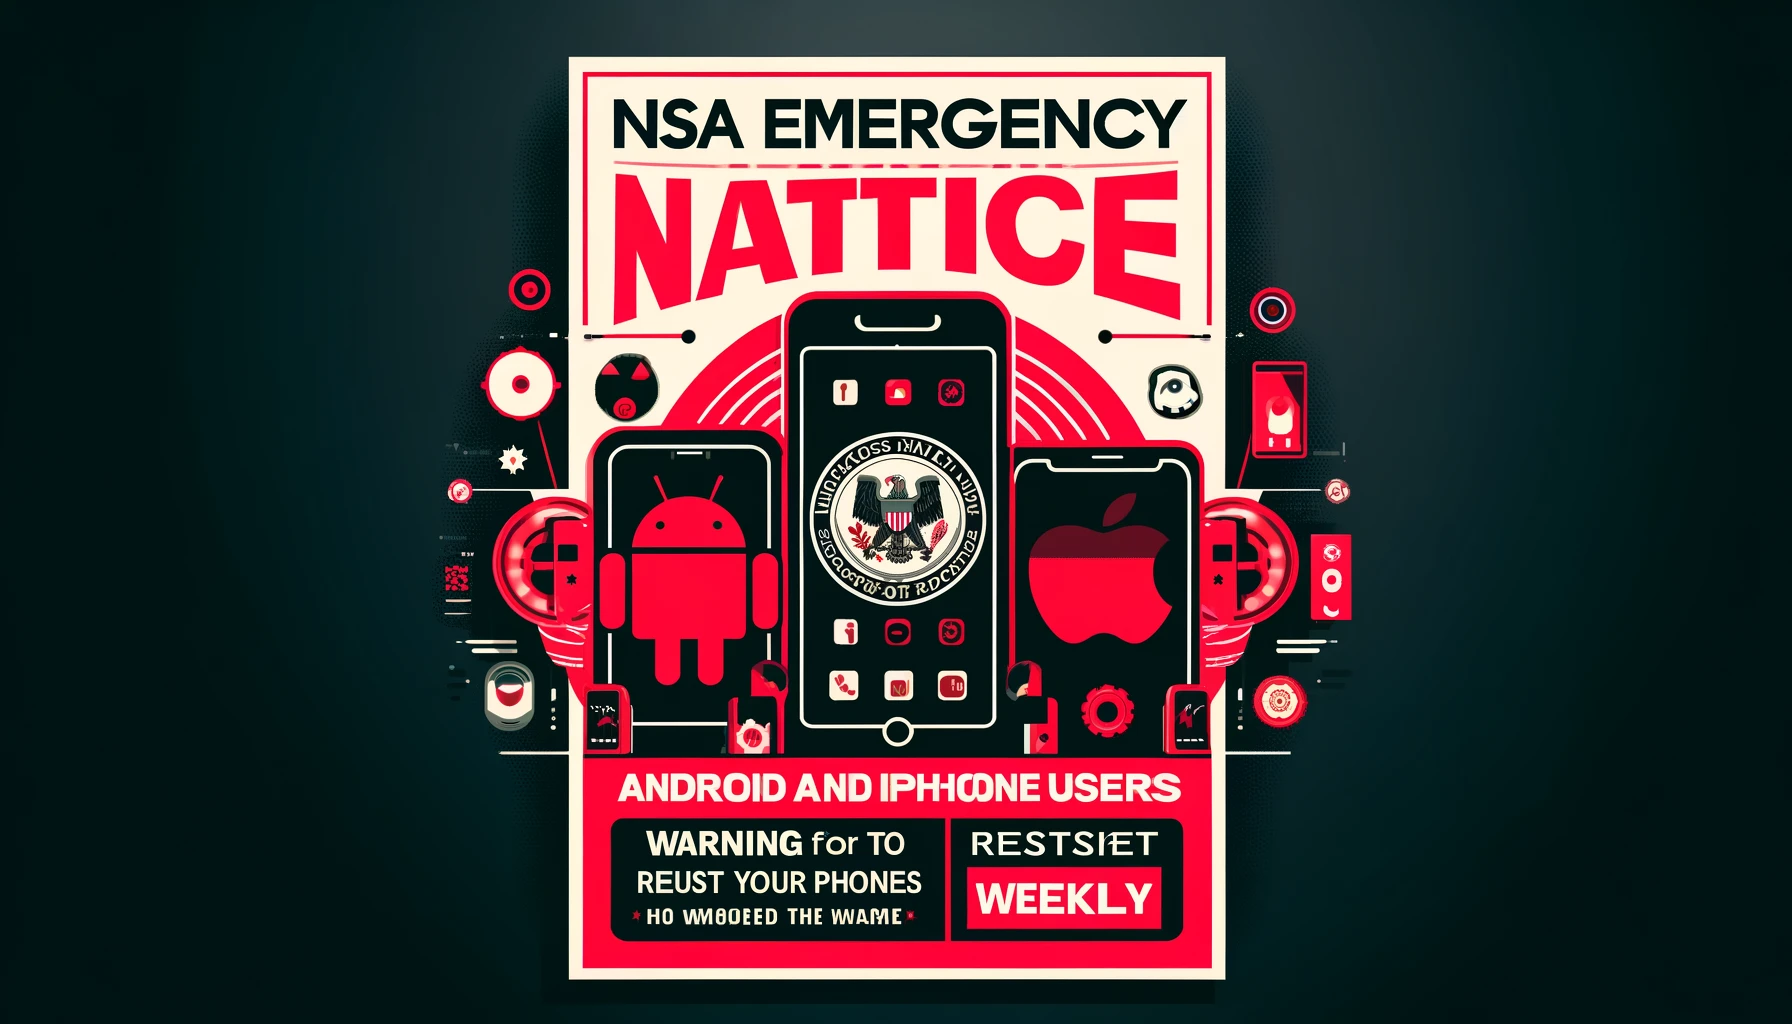 NSA Emergency Notice - Warning for Android and iPhone Users to Restart Their Phones Weekly